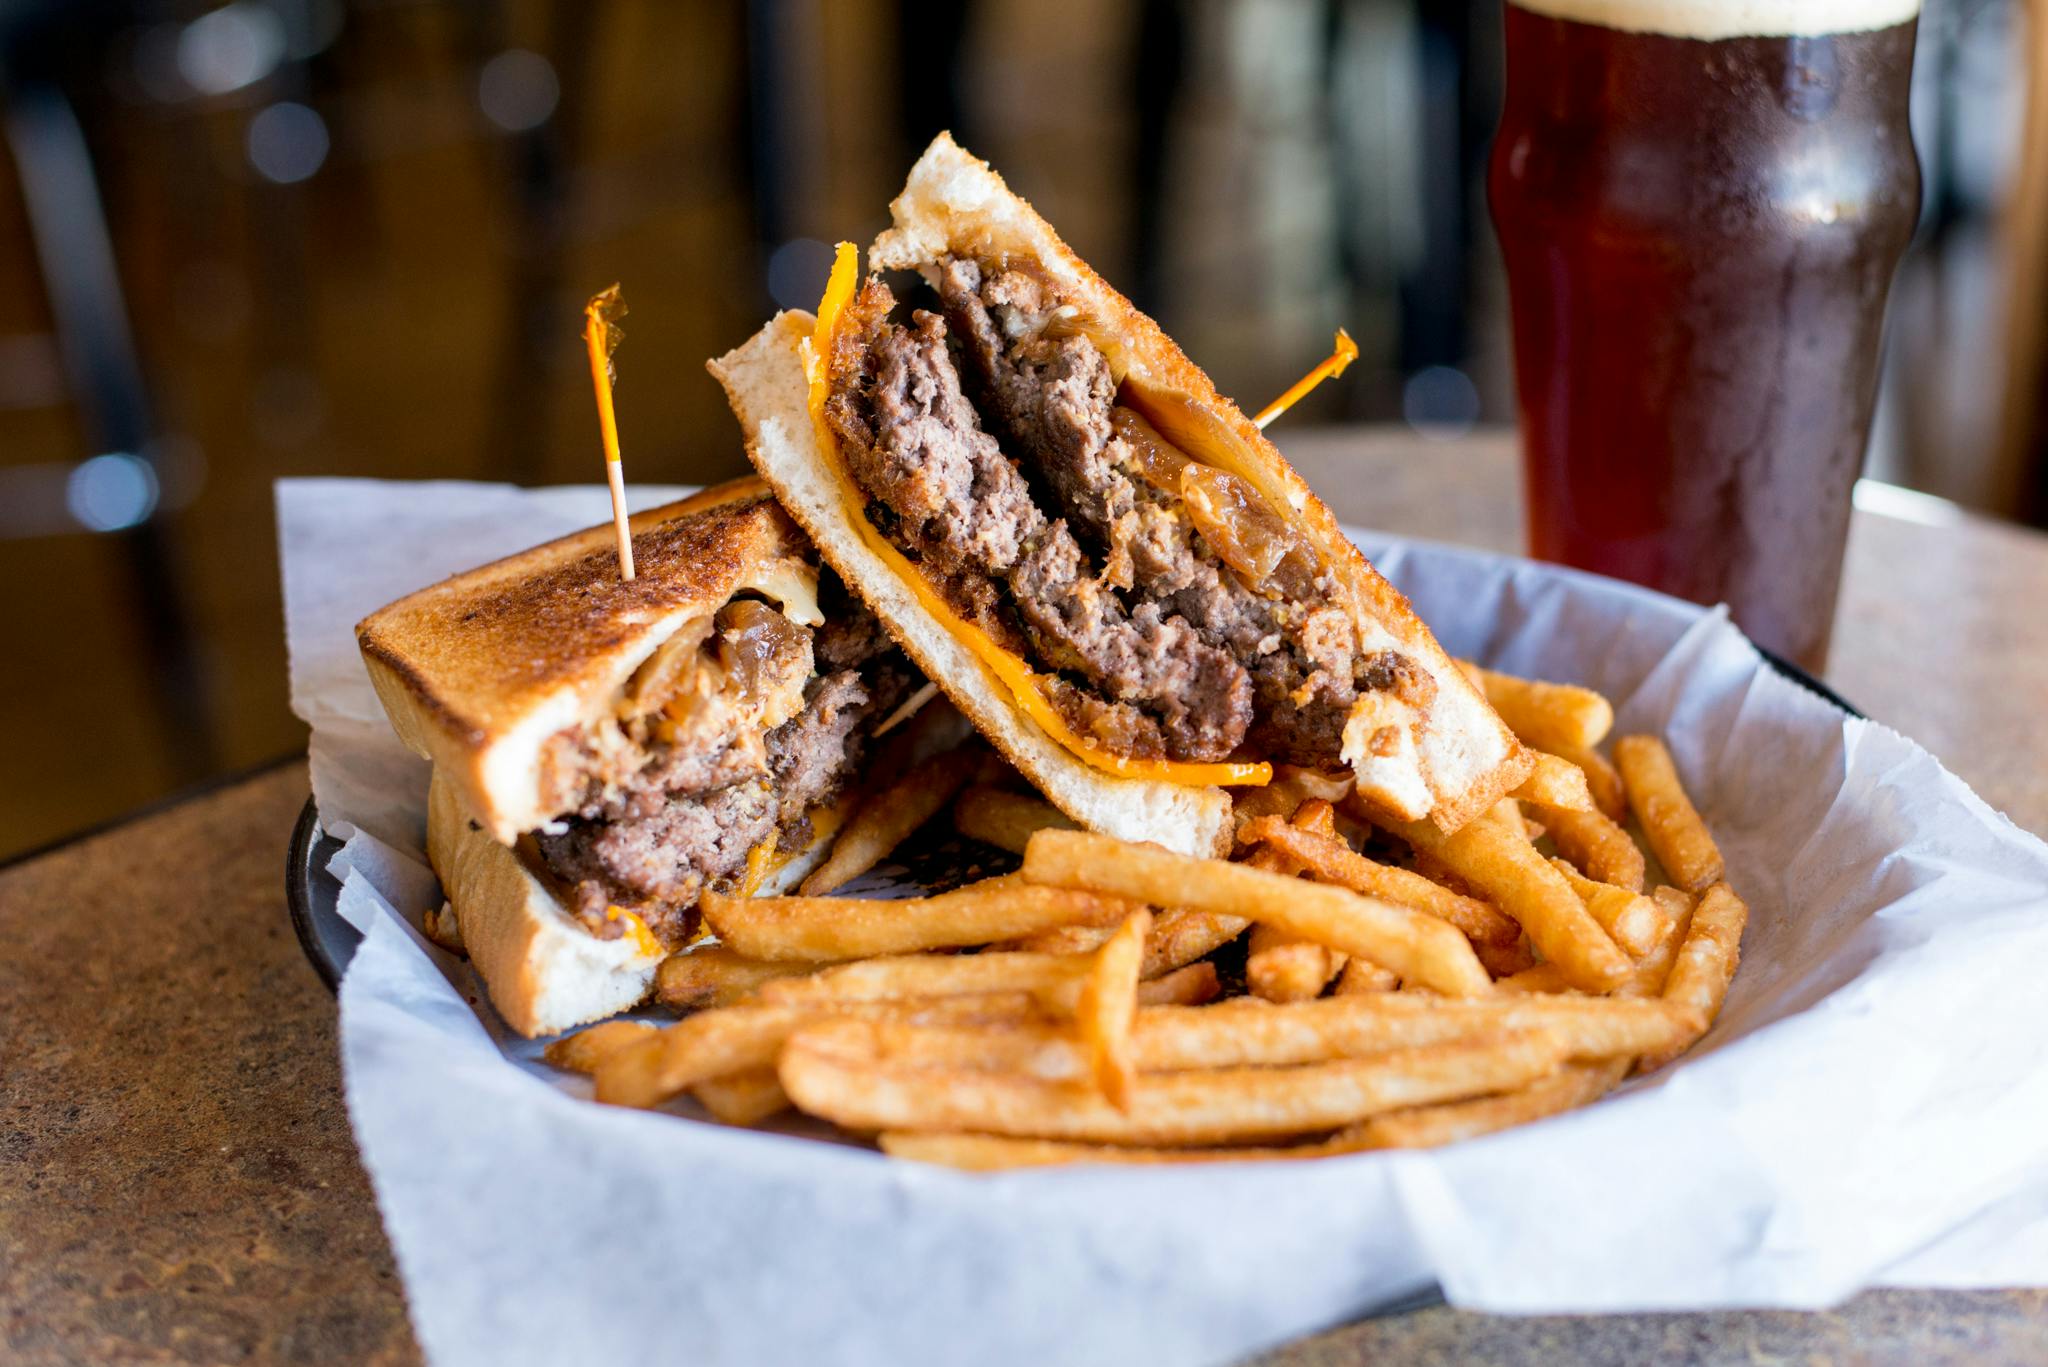 Patty Melt from Brickhouse Craft Burgers & Brews in De Pere, WI